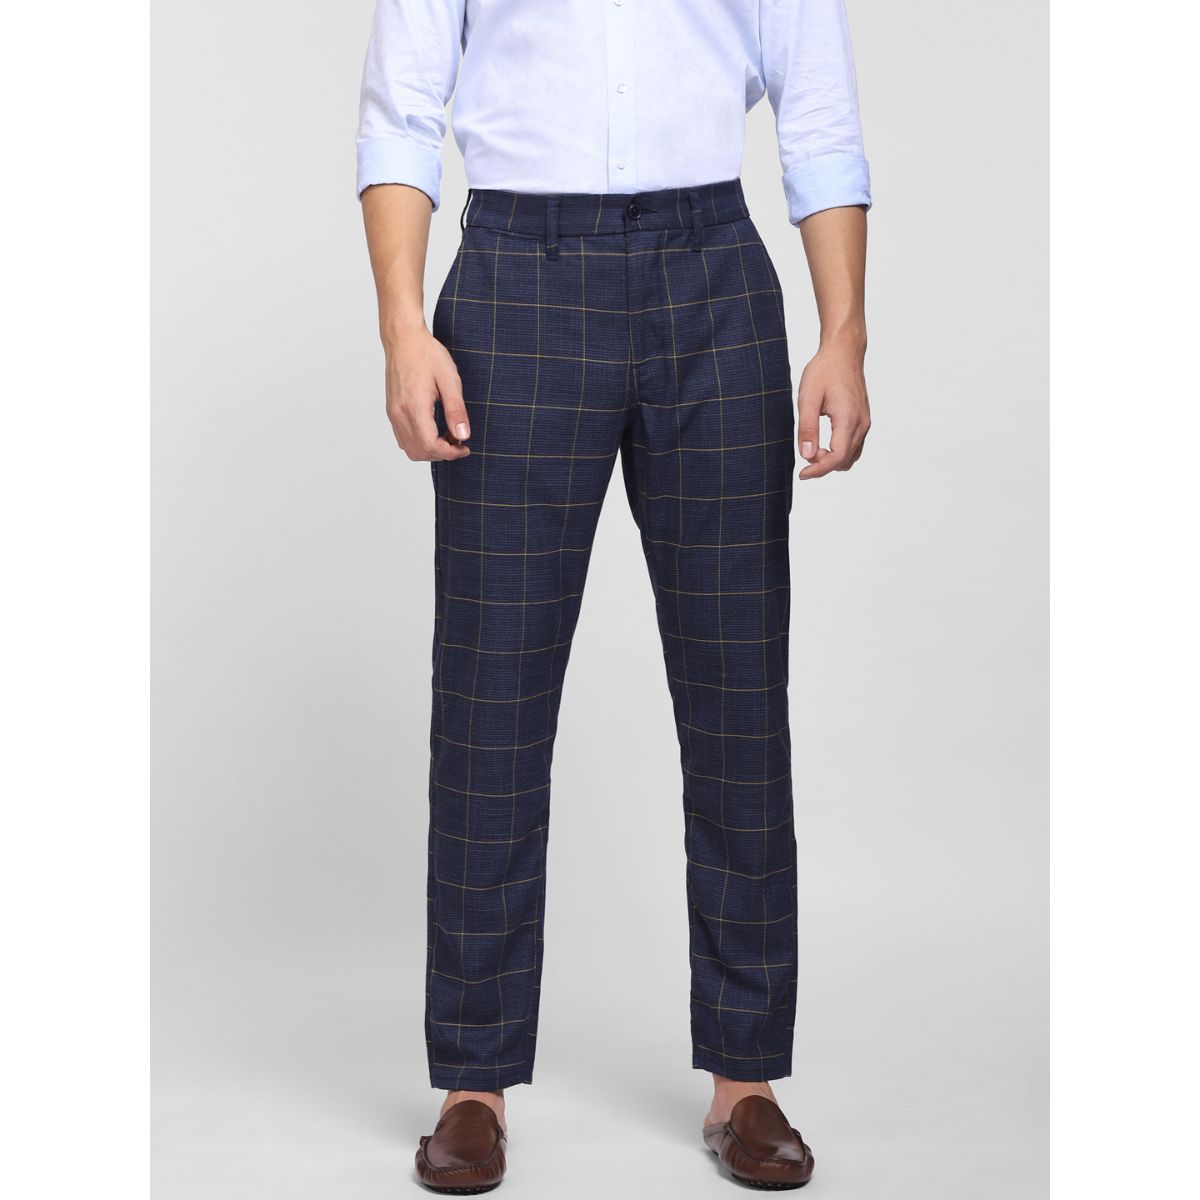 Blue Wool Trousers for Men - Hexis Milano